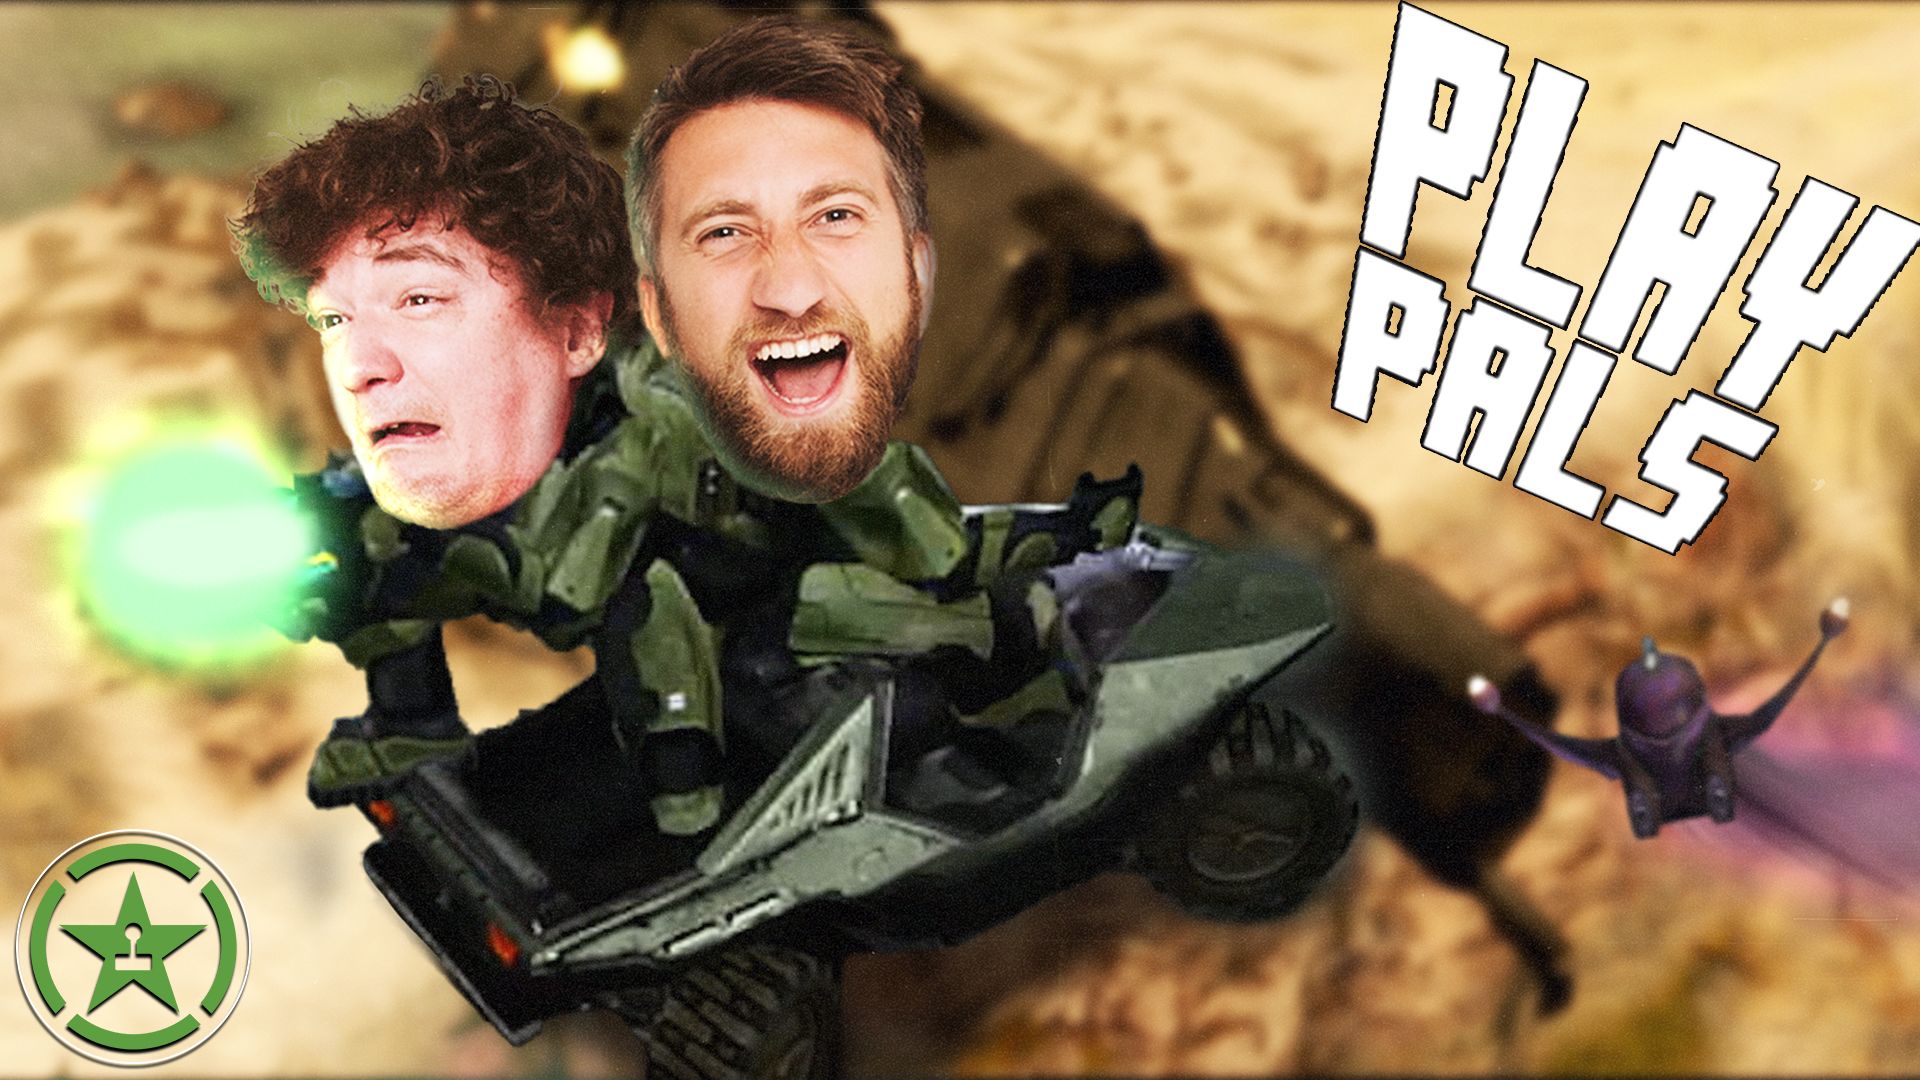 Summer Bois Are Back! - Play Pals - Super Bunny Man (#15) - Rooster Teeth